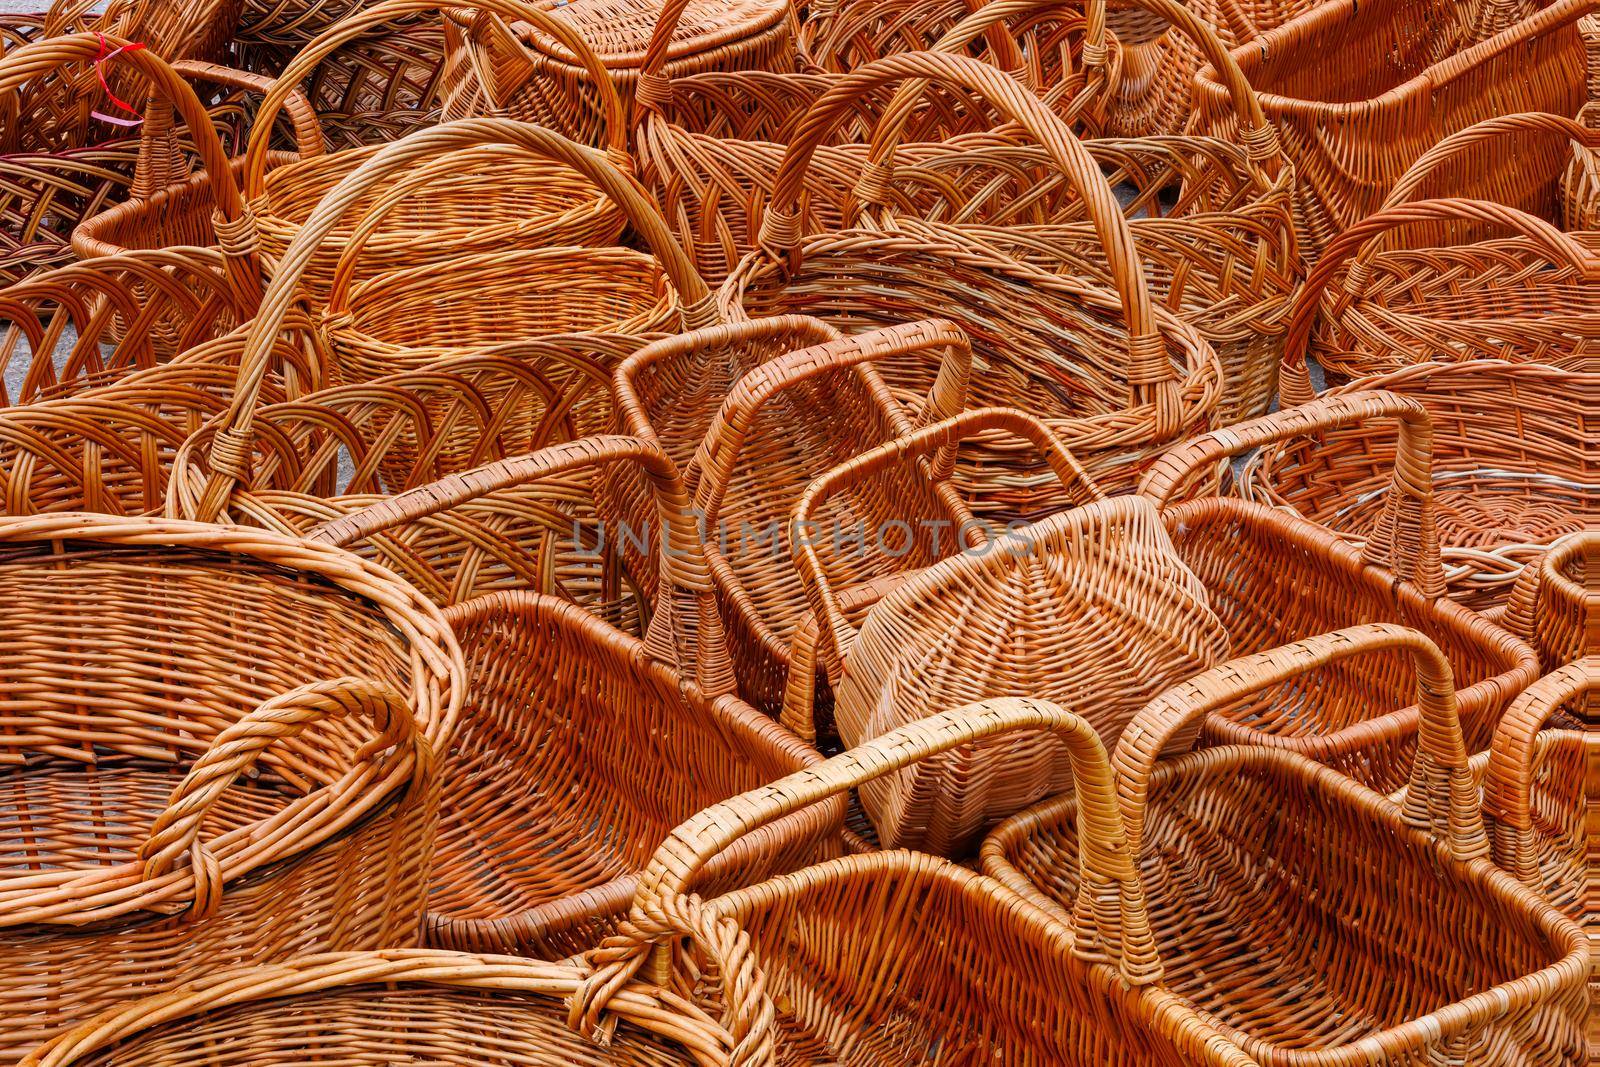 A lot of of many wicker baskets for sale - closeup full-frame background.